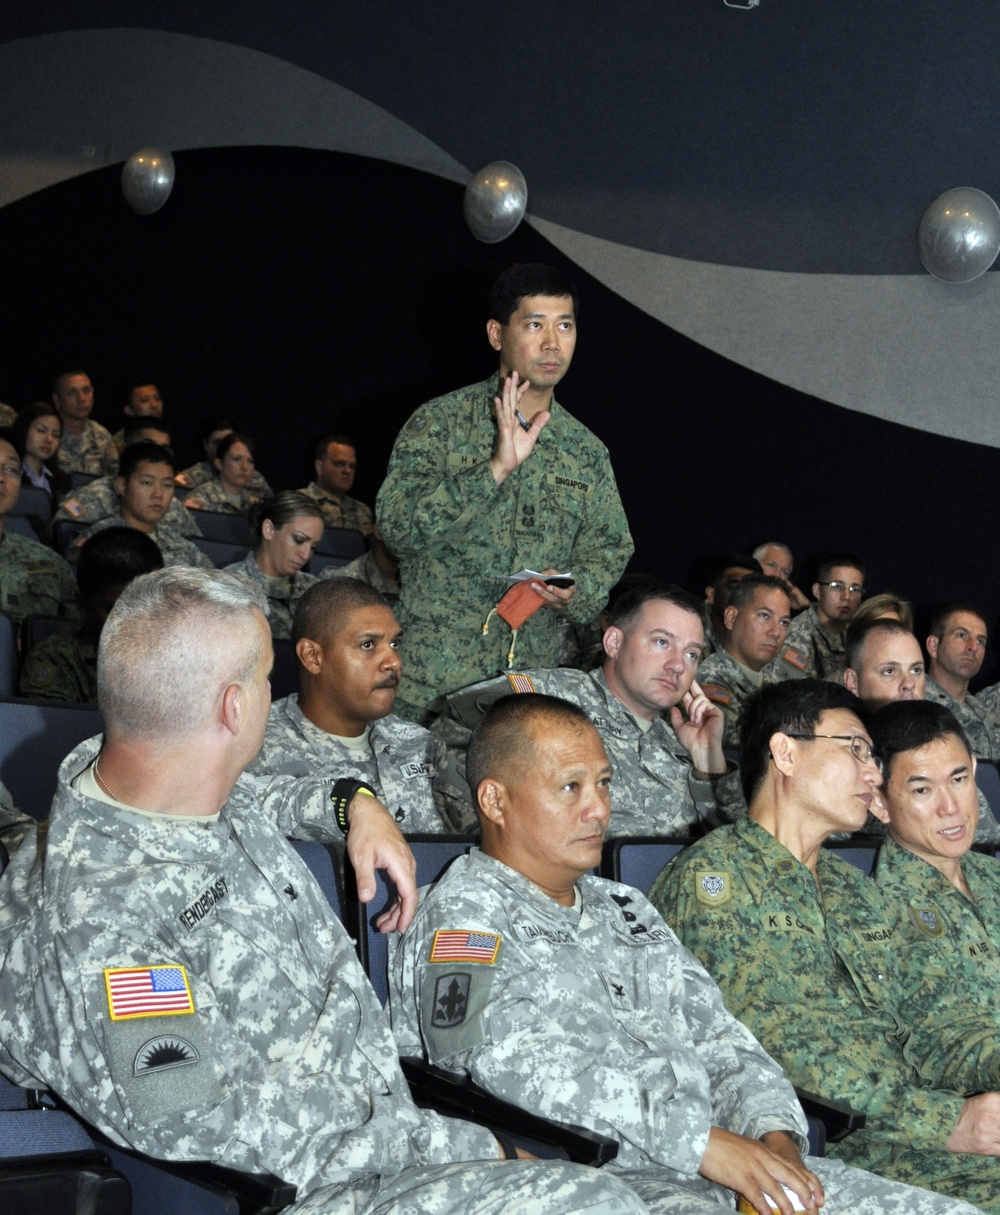 Singapore Armed Forces and US forces military briefing